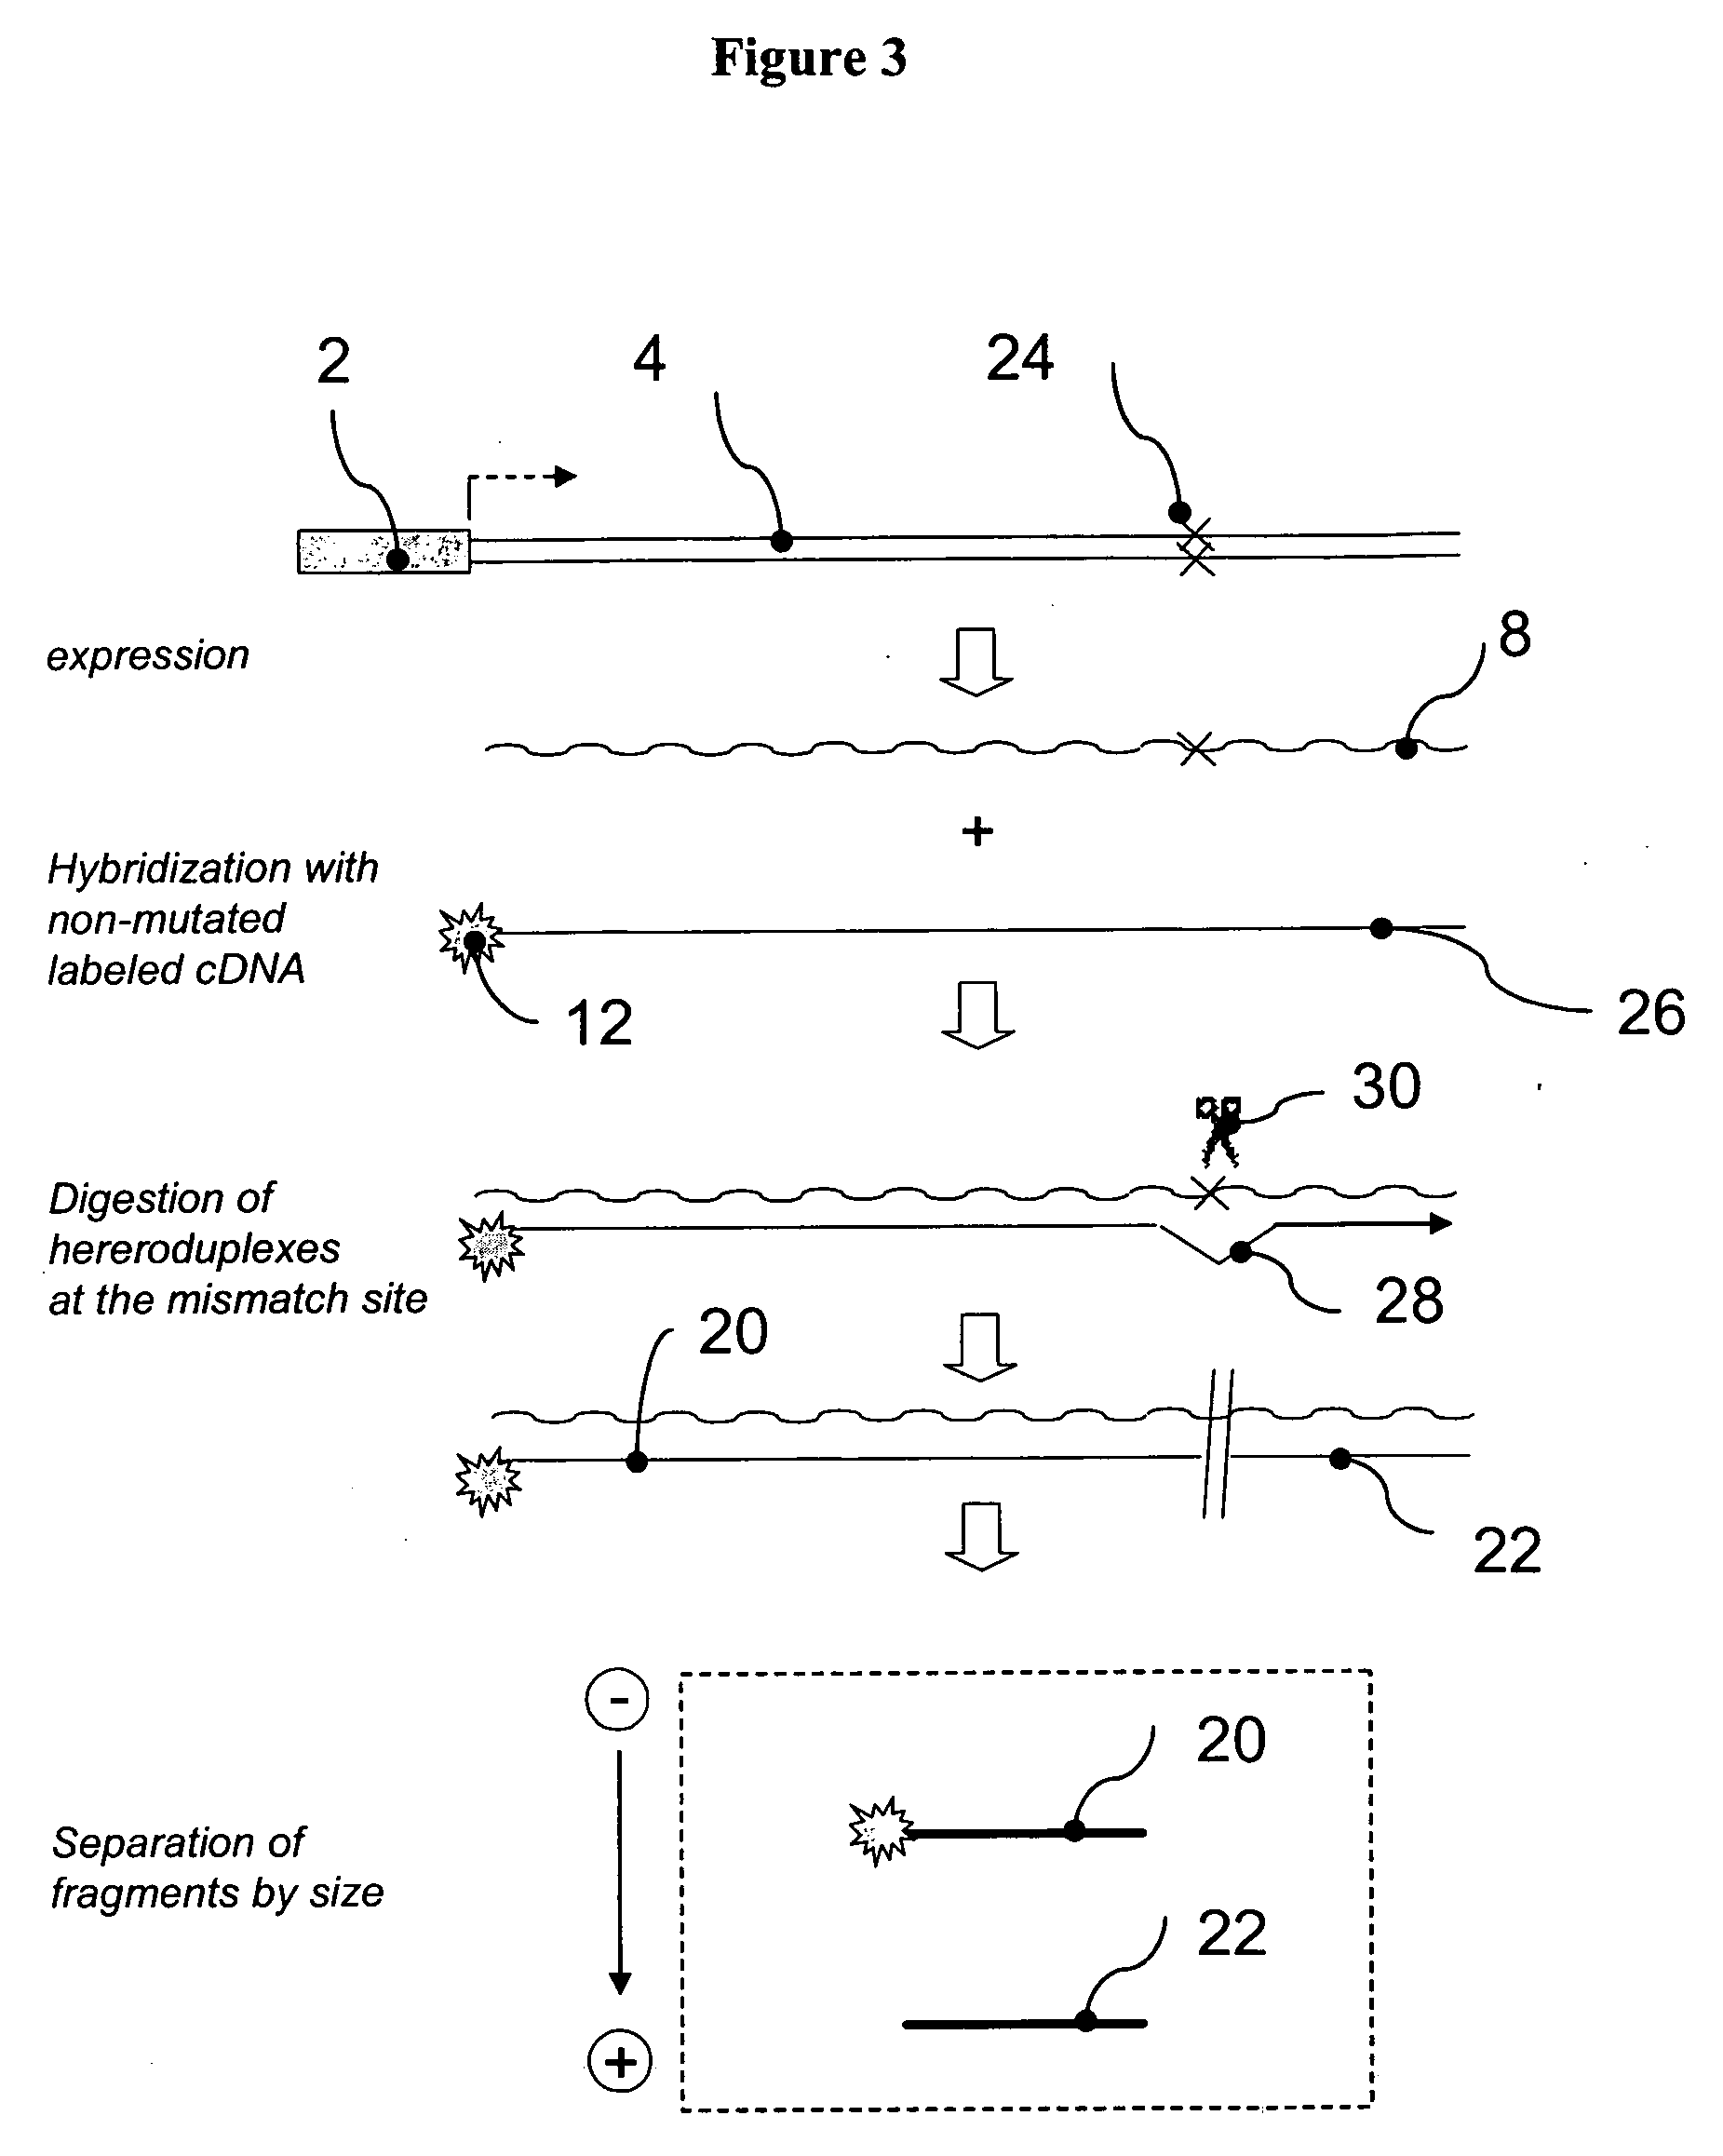 Populations of reporter sequences and methods of their use